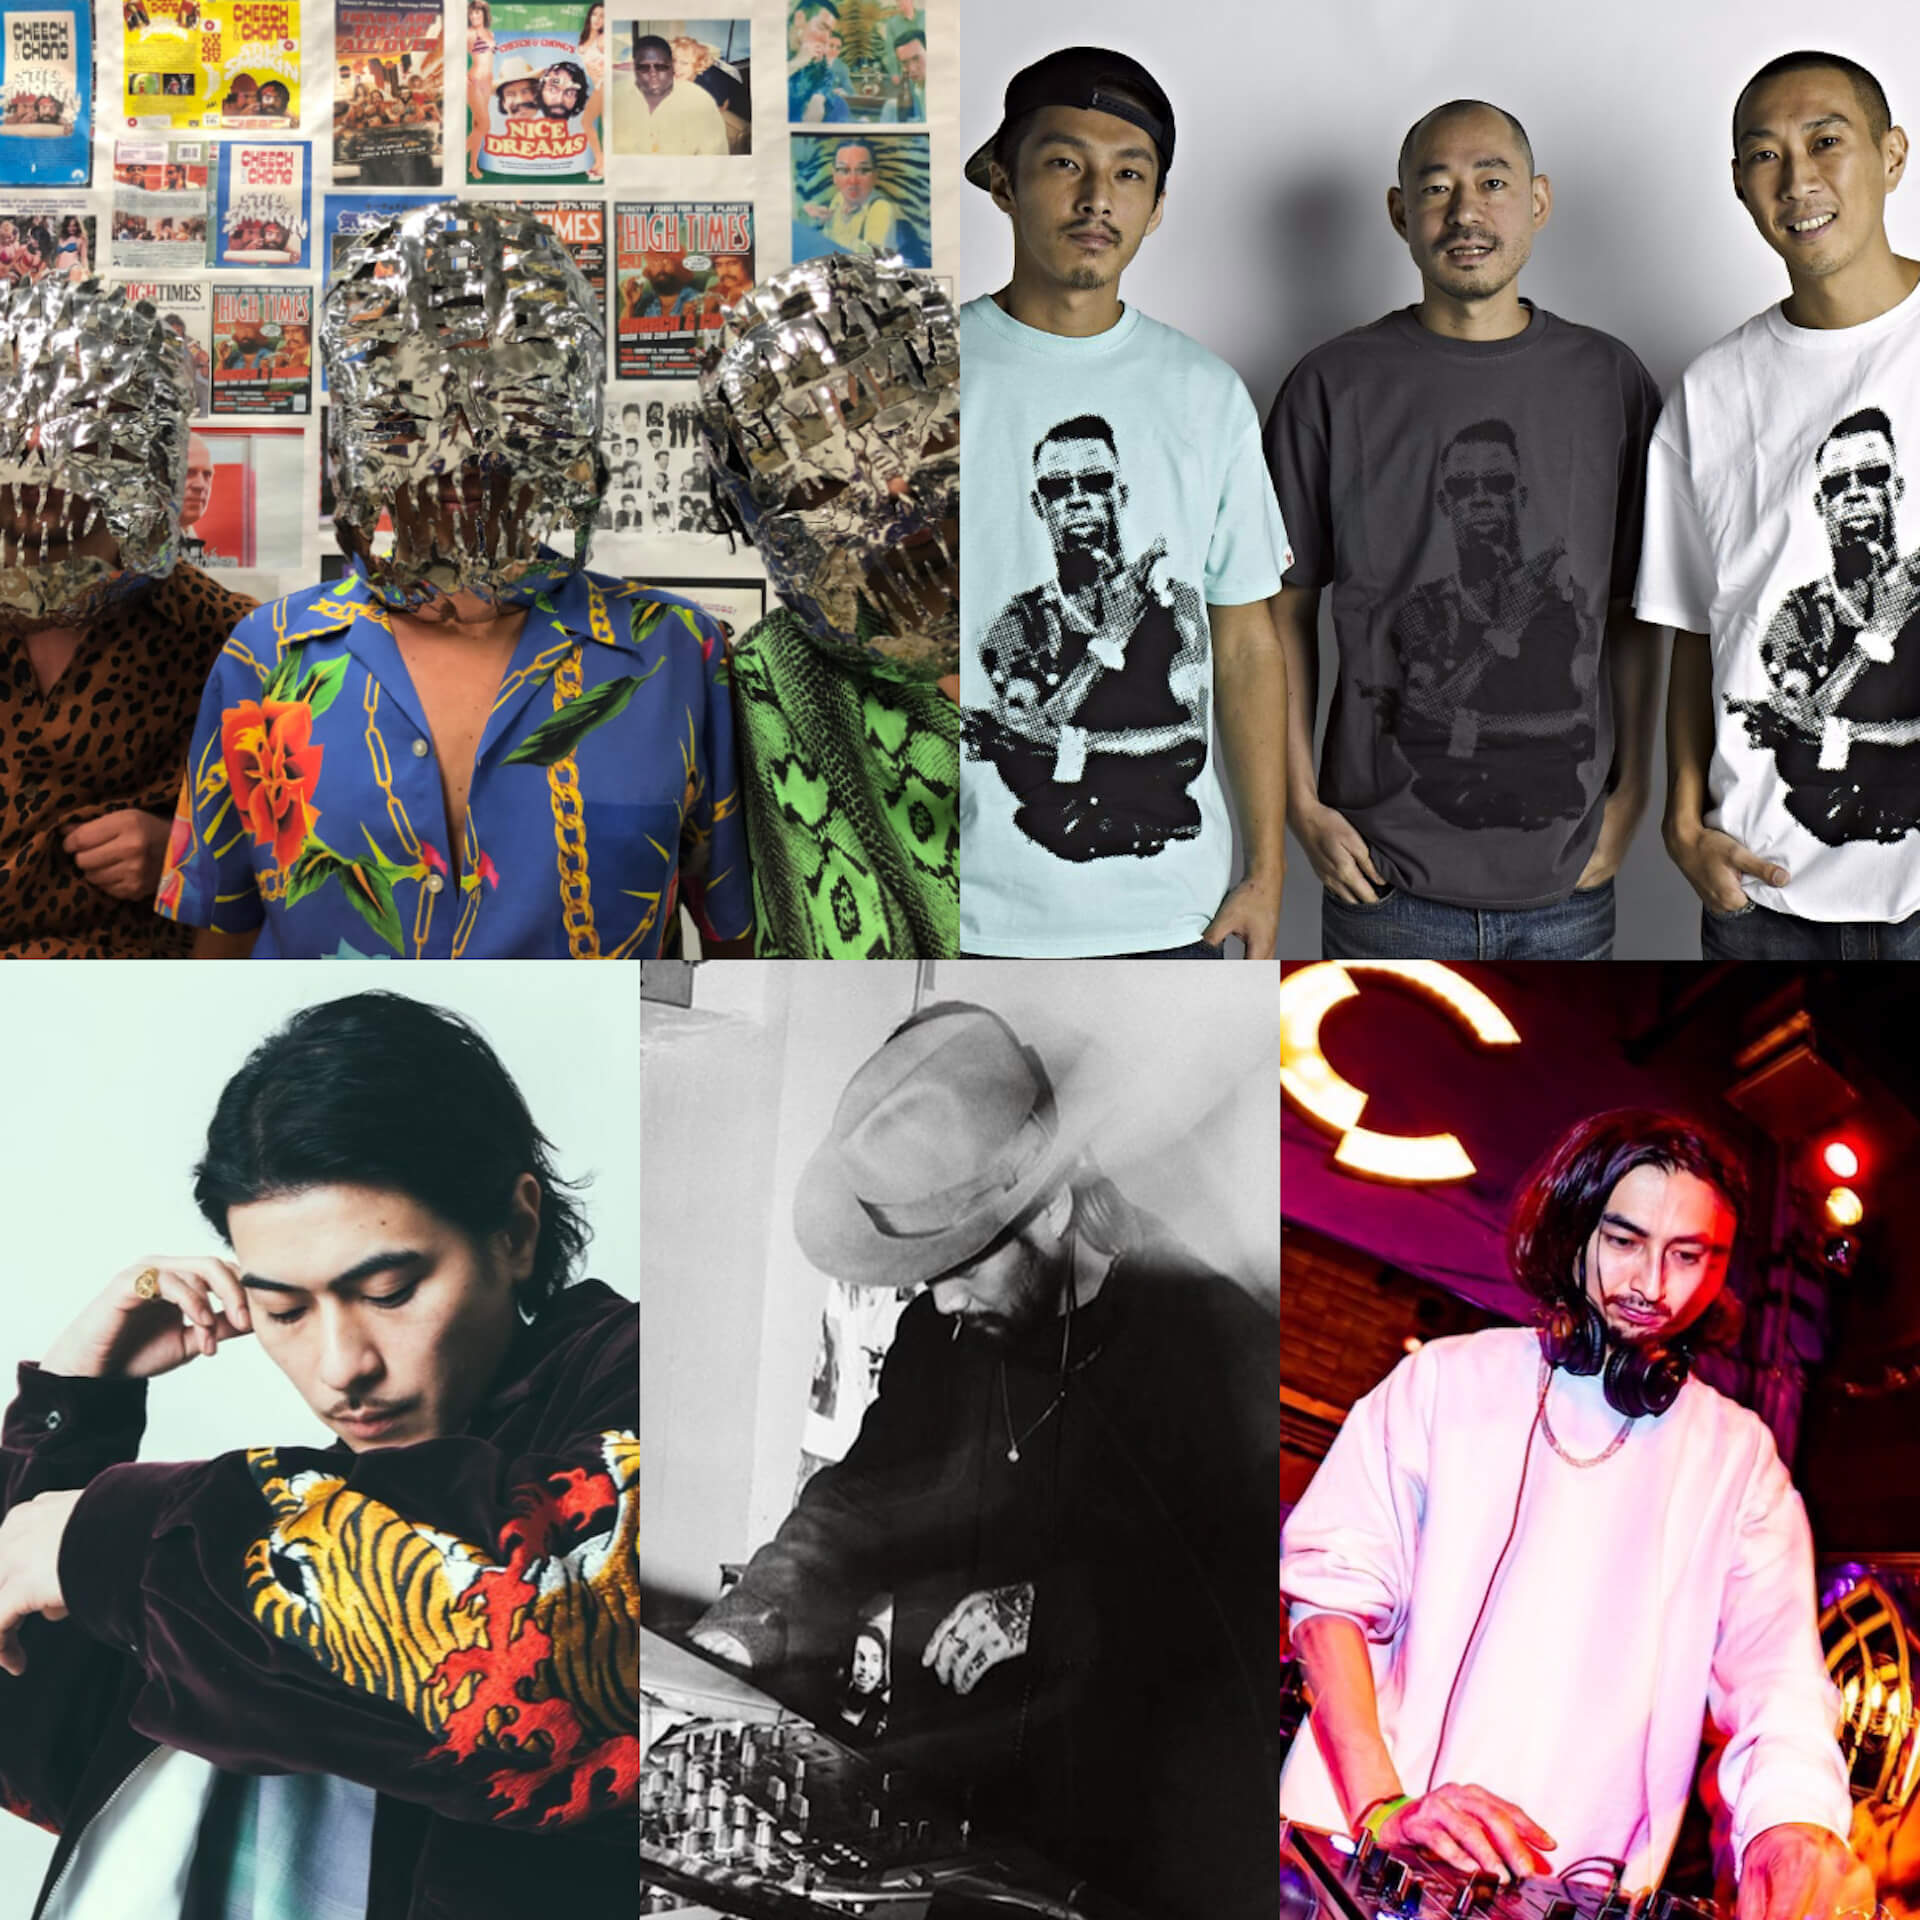 ContactとSound Museum VISIONが一夜限りのスペシャルパーティを開催｜duo MUSIC EXCHANGE、Spotify O-EAST、東間屋の全店舗回遊イベントに music221216-contact-vision-06